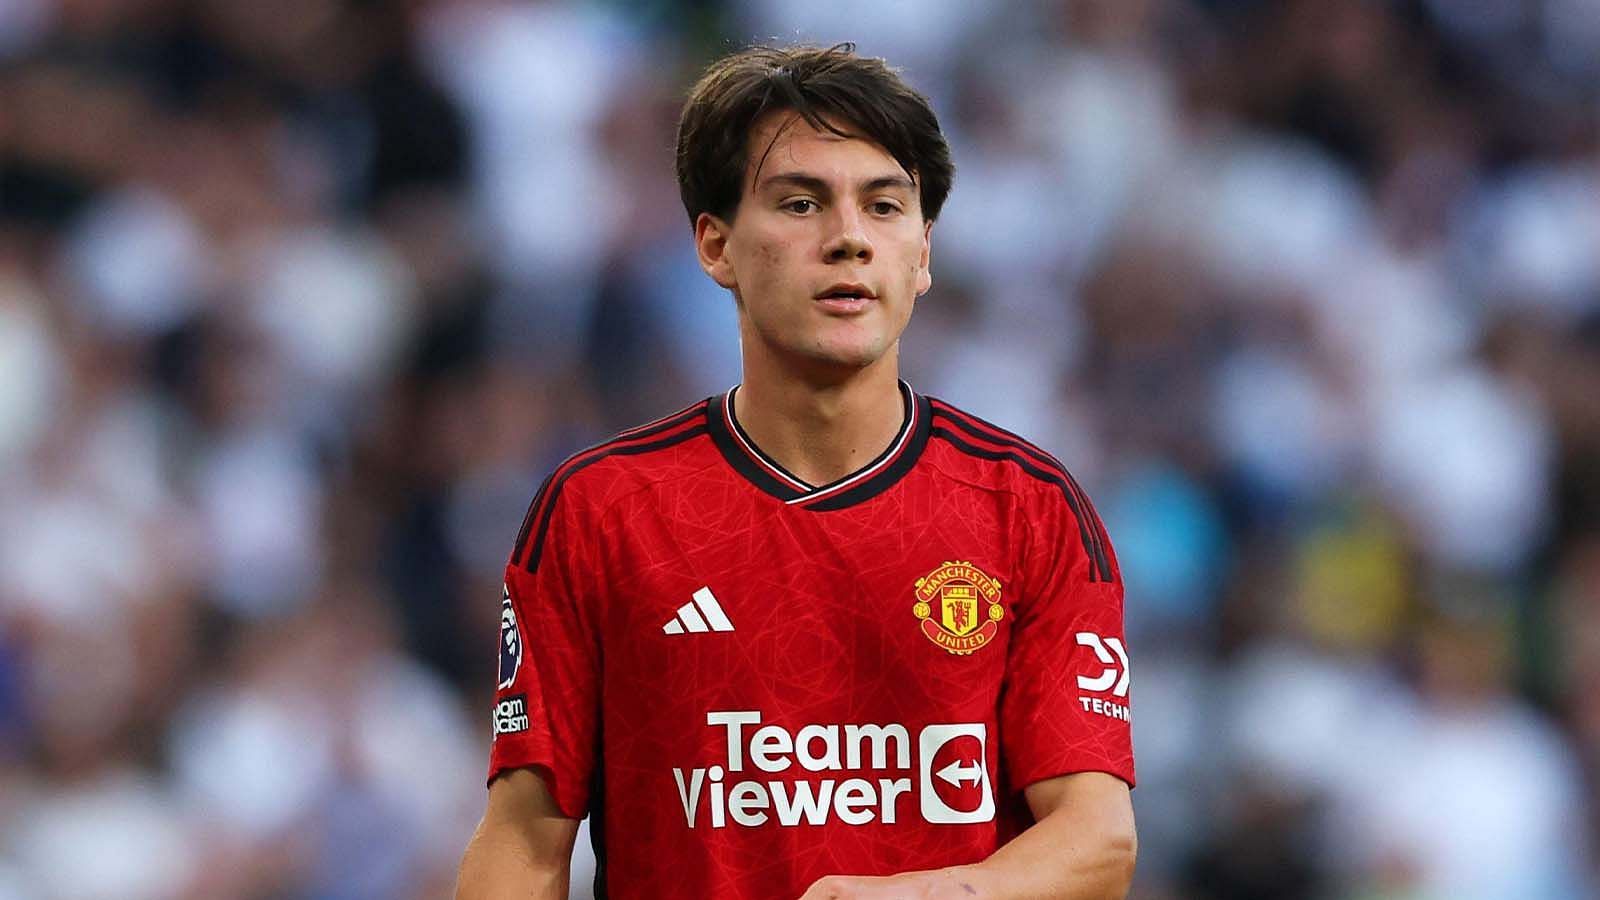 Manchester United youngster Facundo Pellistri